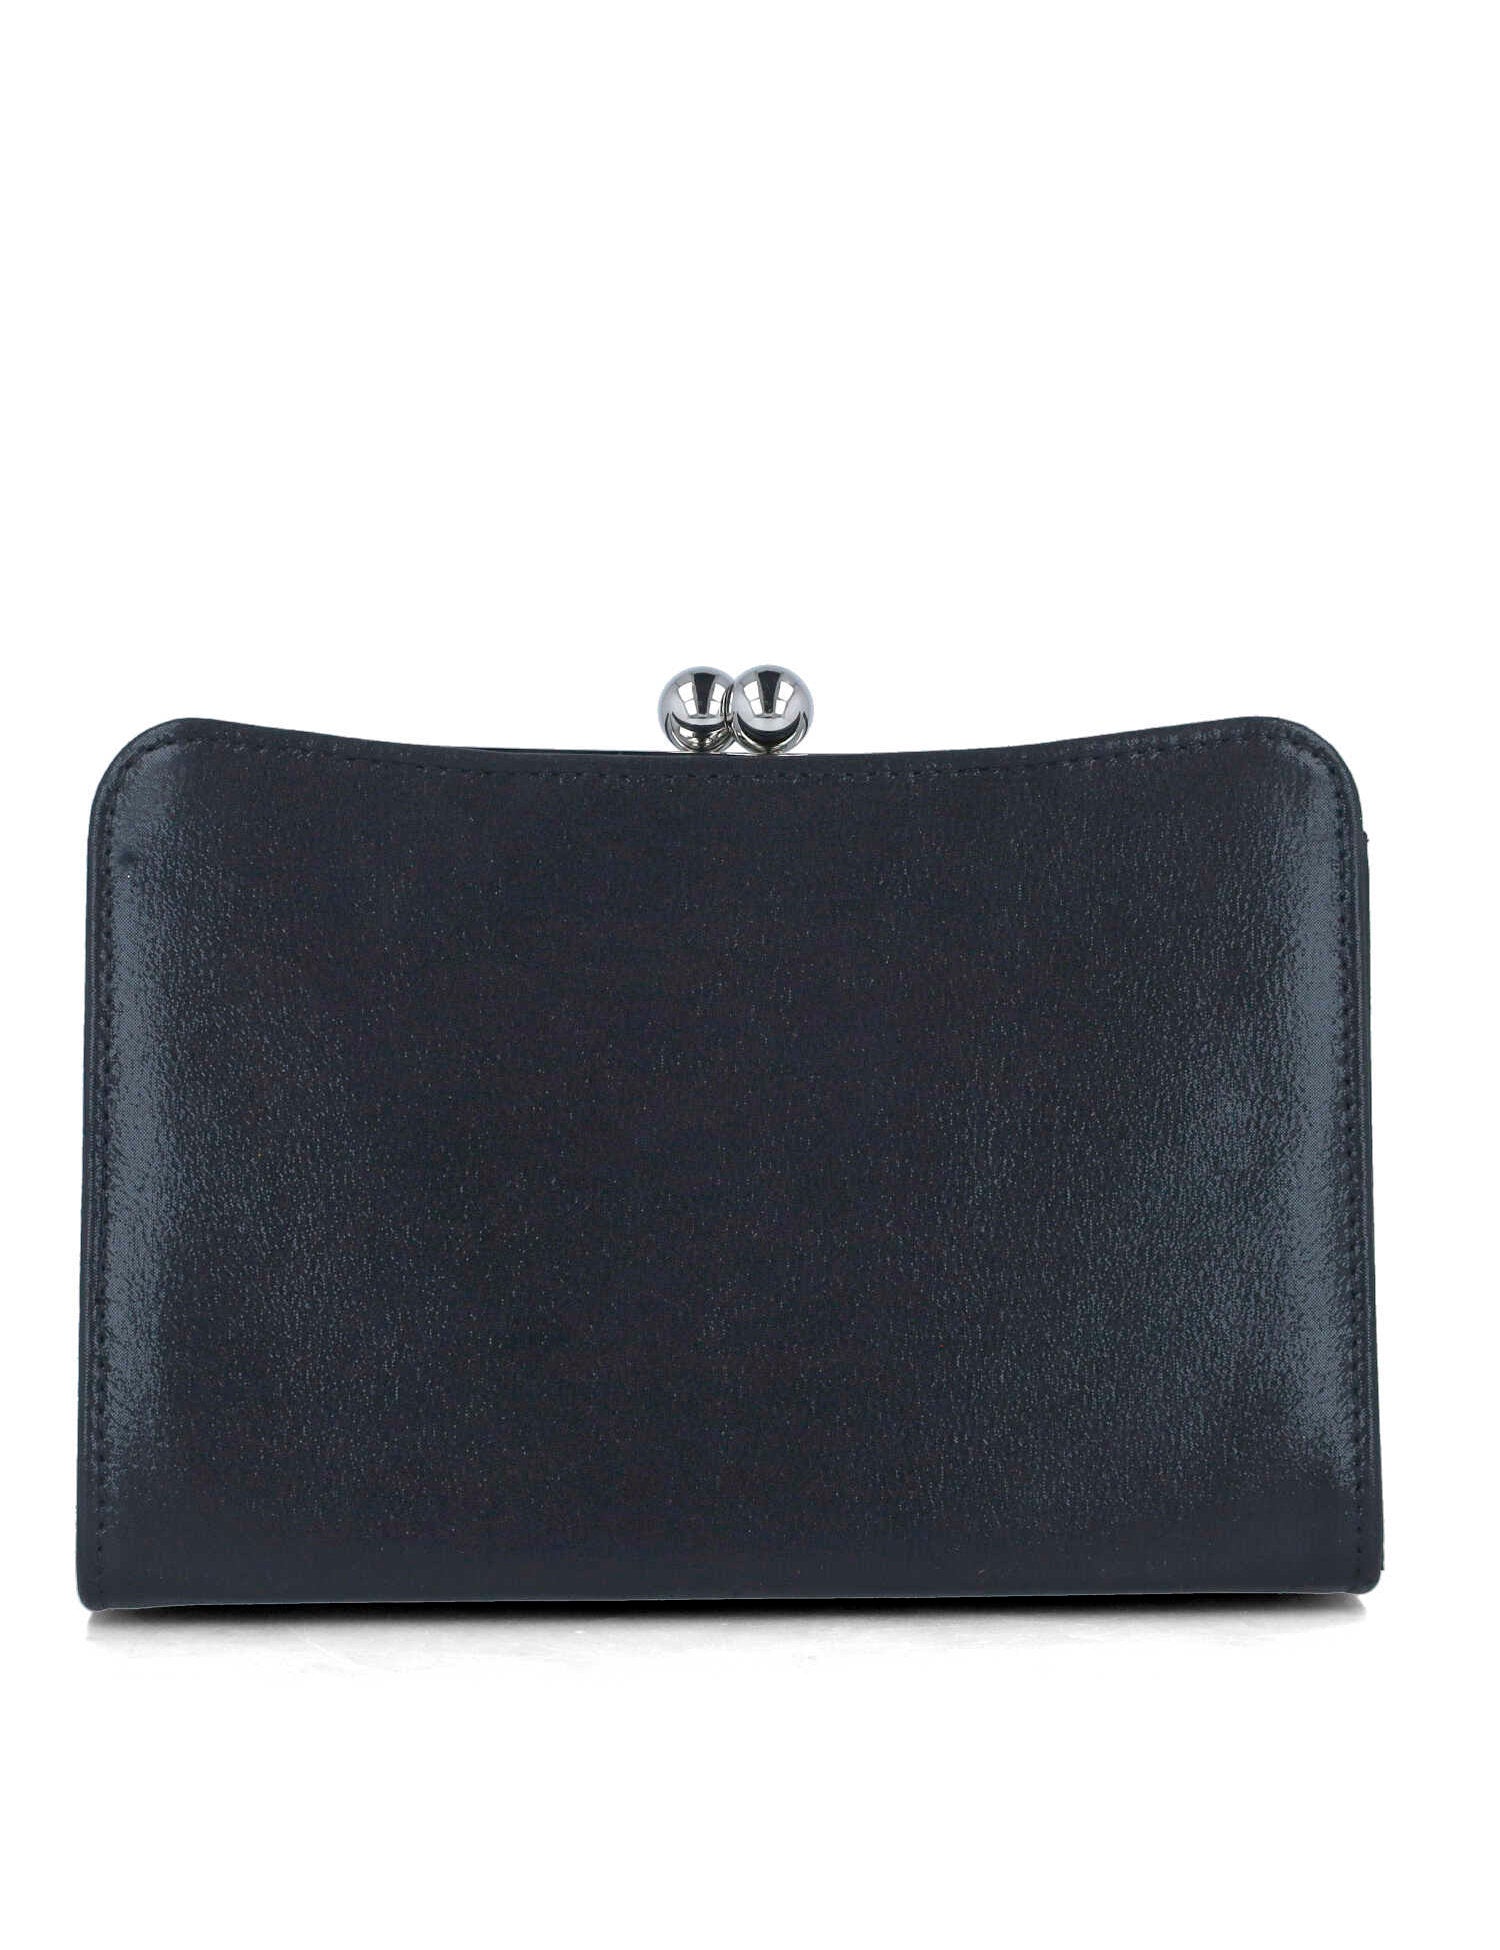 Black Clutch With Embellished Hand Strap_85490_01_03